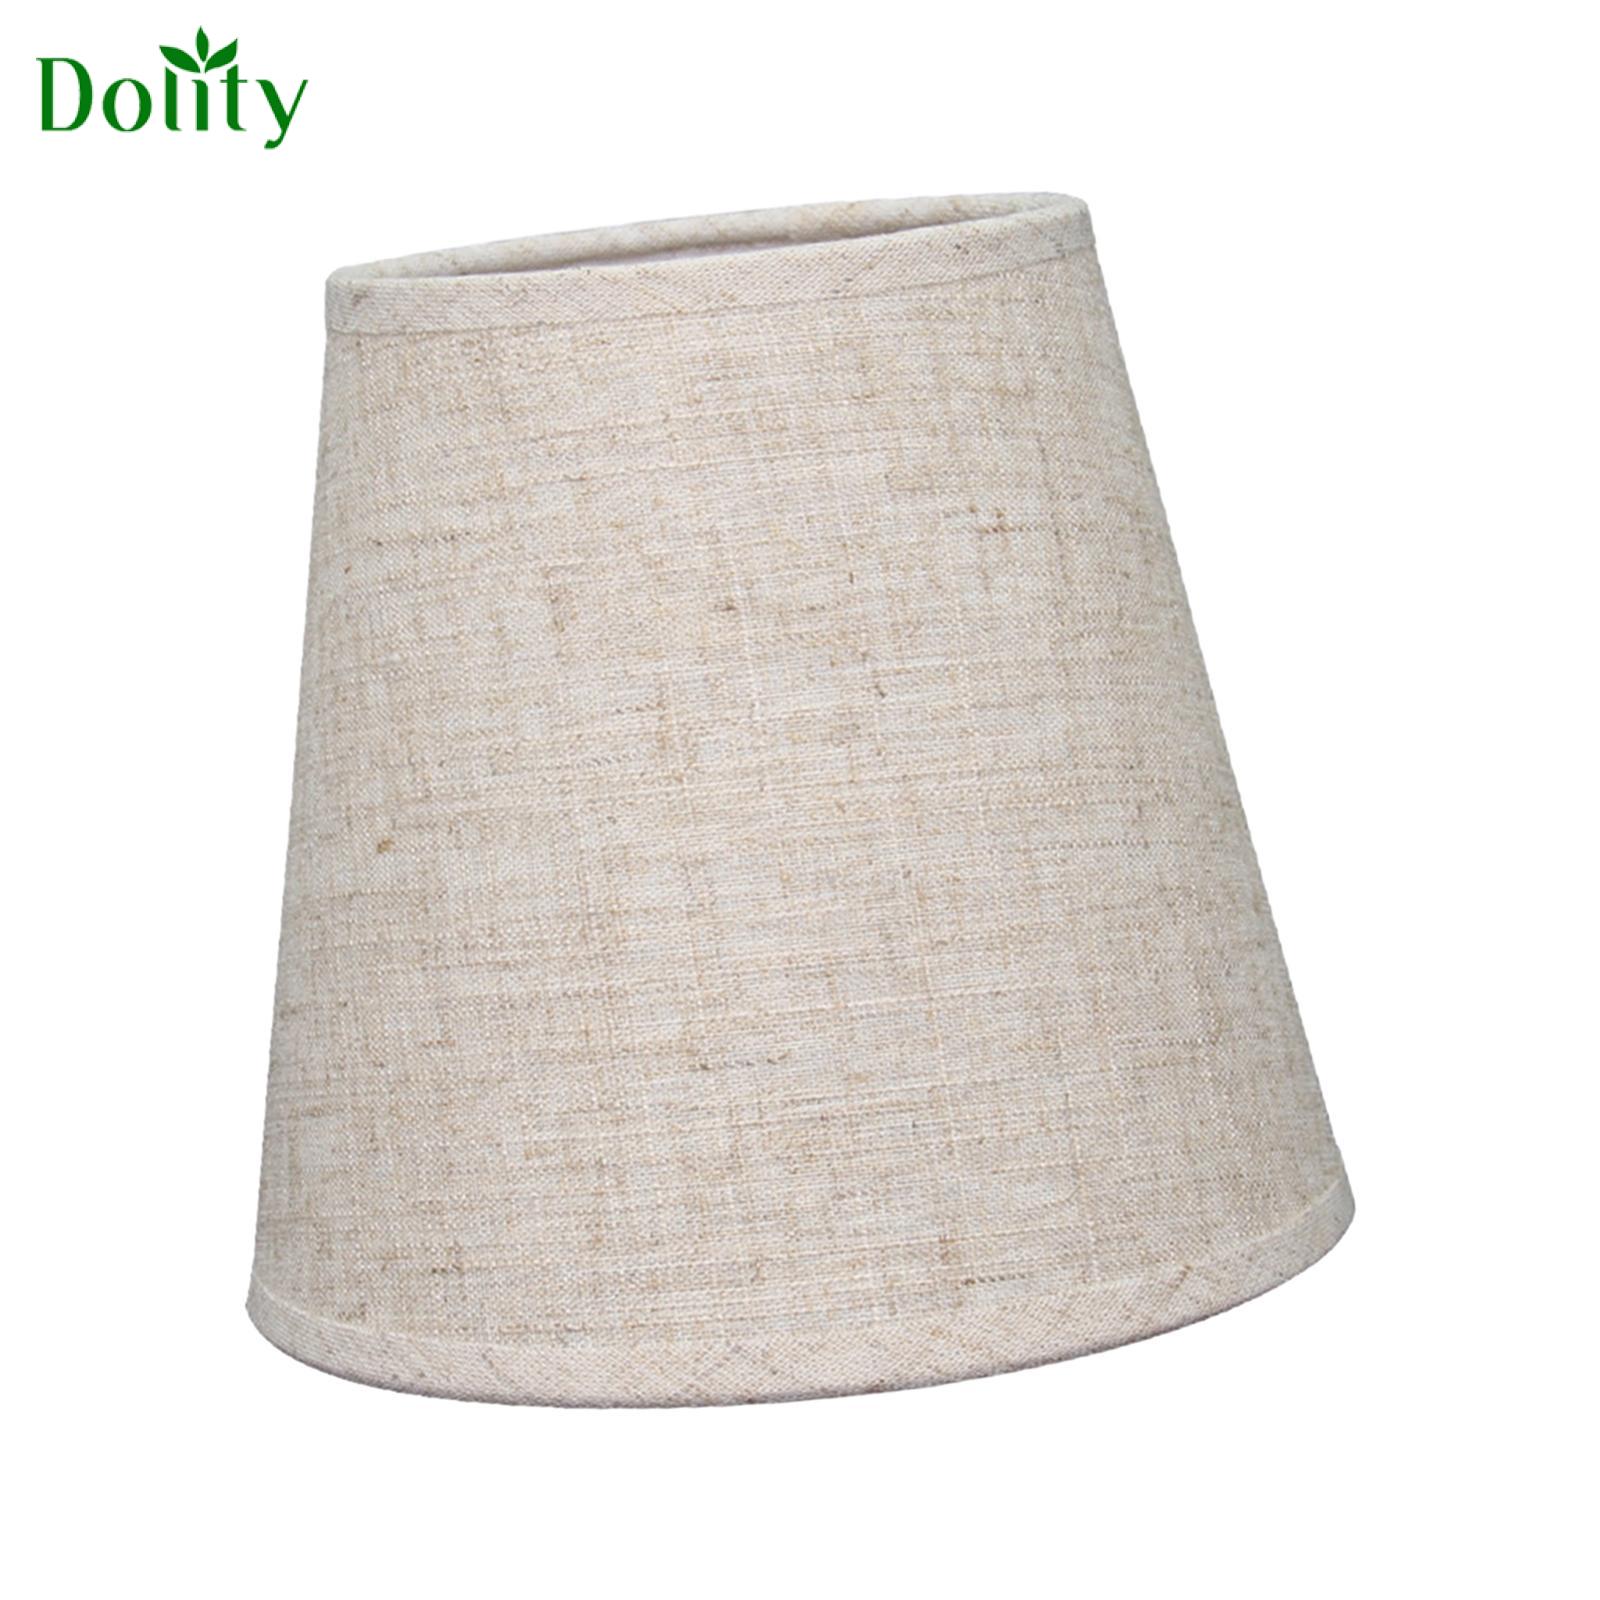 Dolity Hand Crafted Jute Cloth Lamp Cover for Table Lamps Desk Lamps